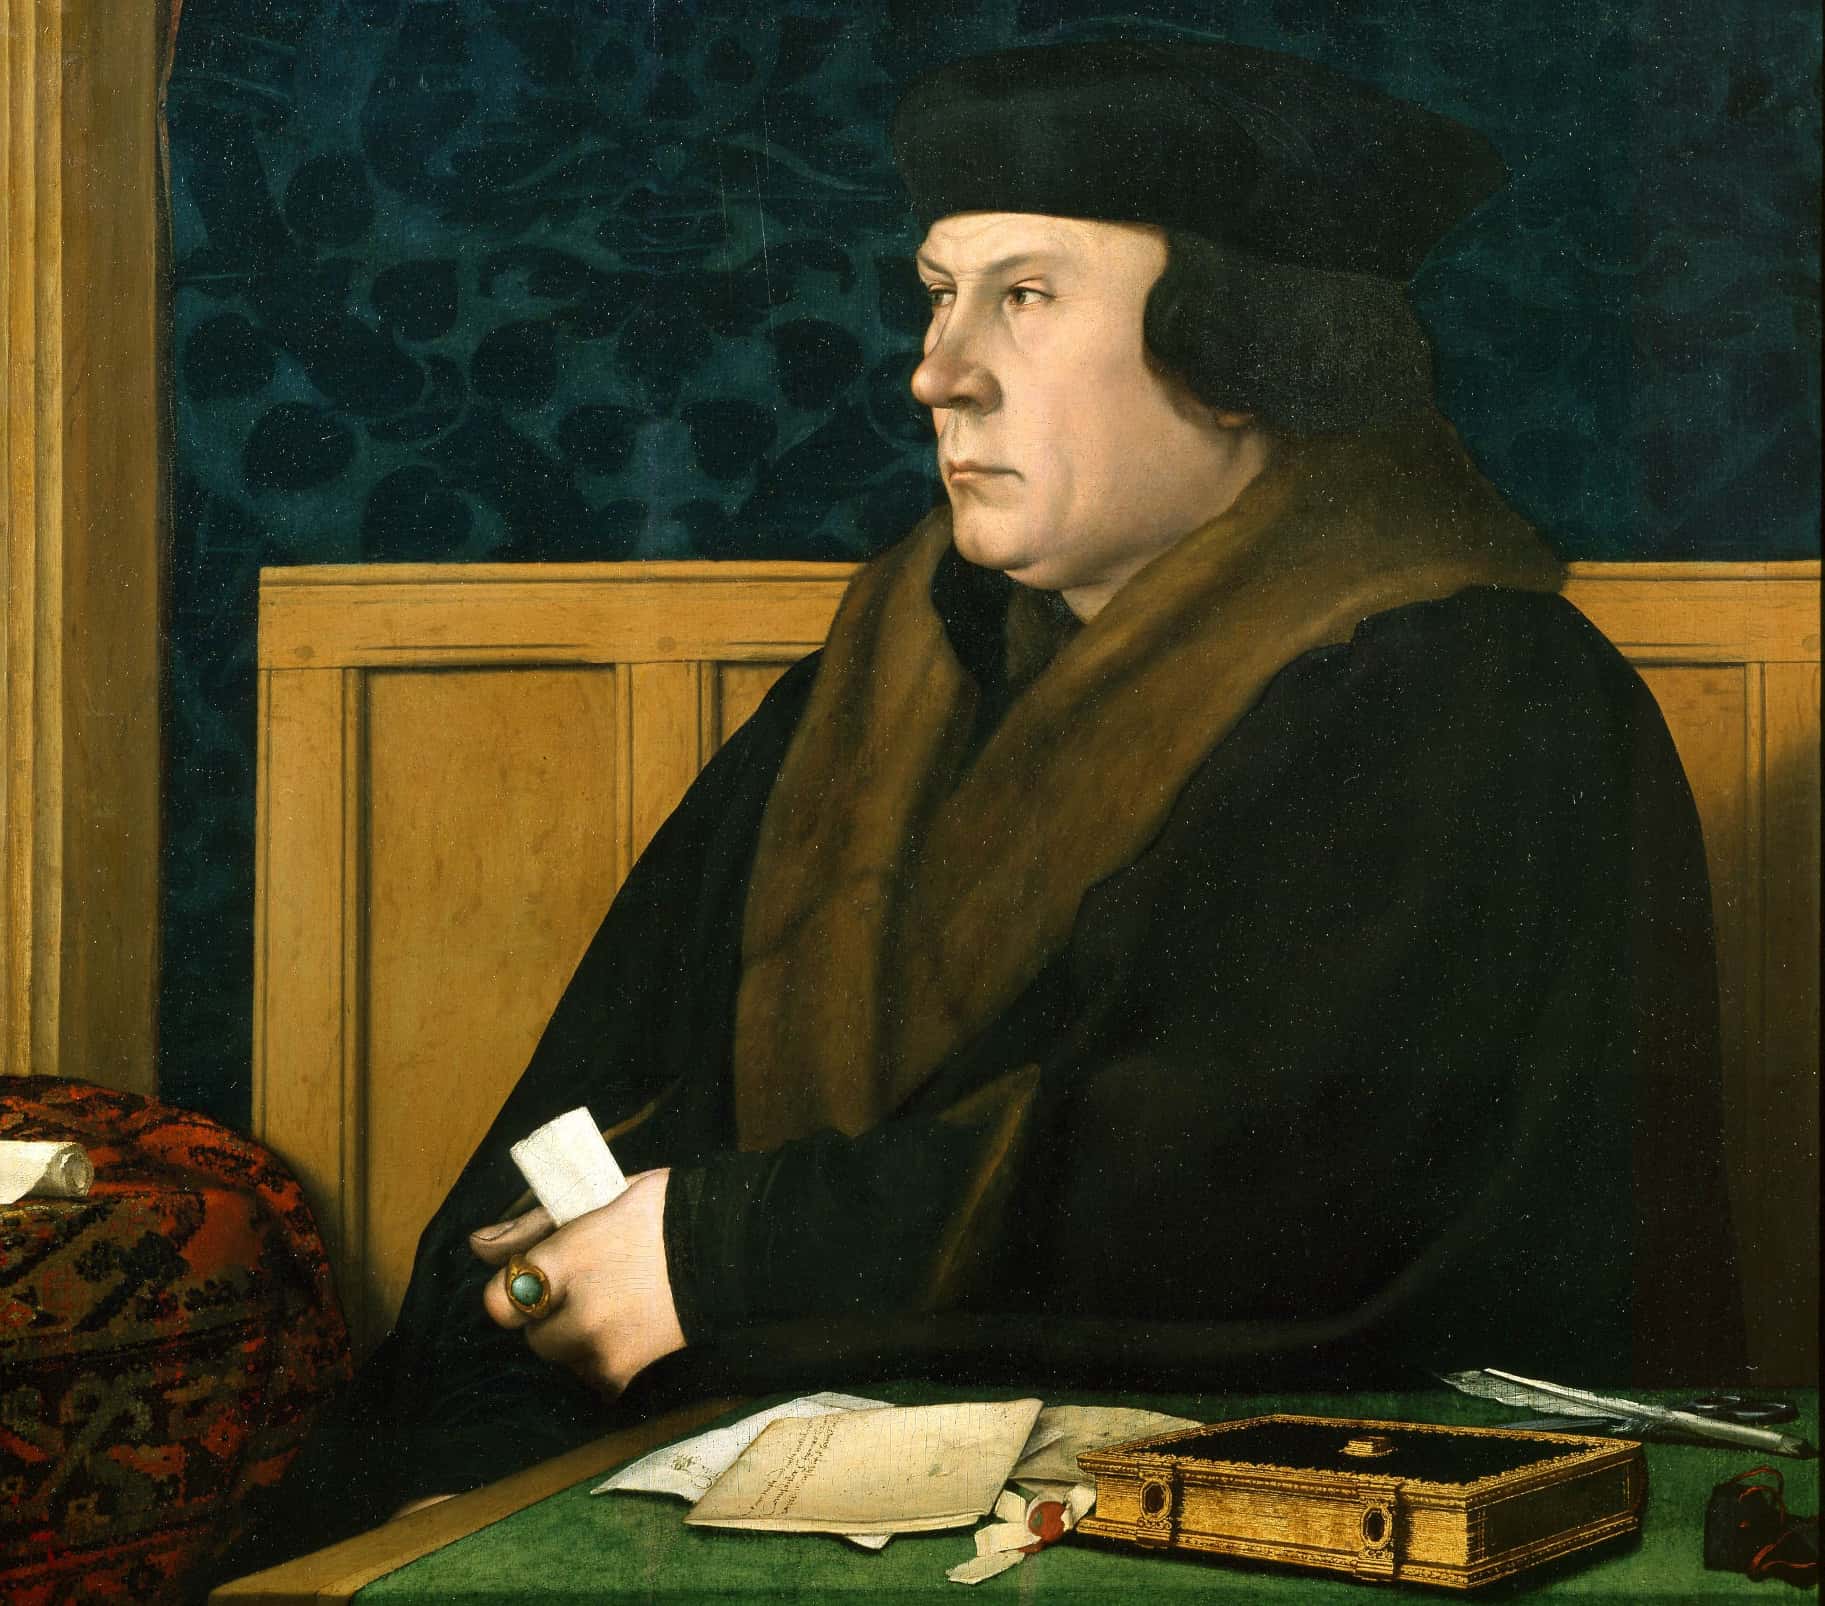 <p>Almost as soon as he met her, <strong>Henry's reaction to his bride was chilling.</strong> He pretty much immediately complained about her looks, and blamed not only Holbein for supposedly glowing her up too much, but also his chief Minister Thomas Cromwell, who urged him to marry Anne and kept talking up her beauty. And since this is King Henry we're talking about, he did <em>not</em> hold back.</p>